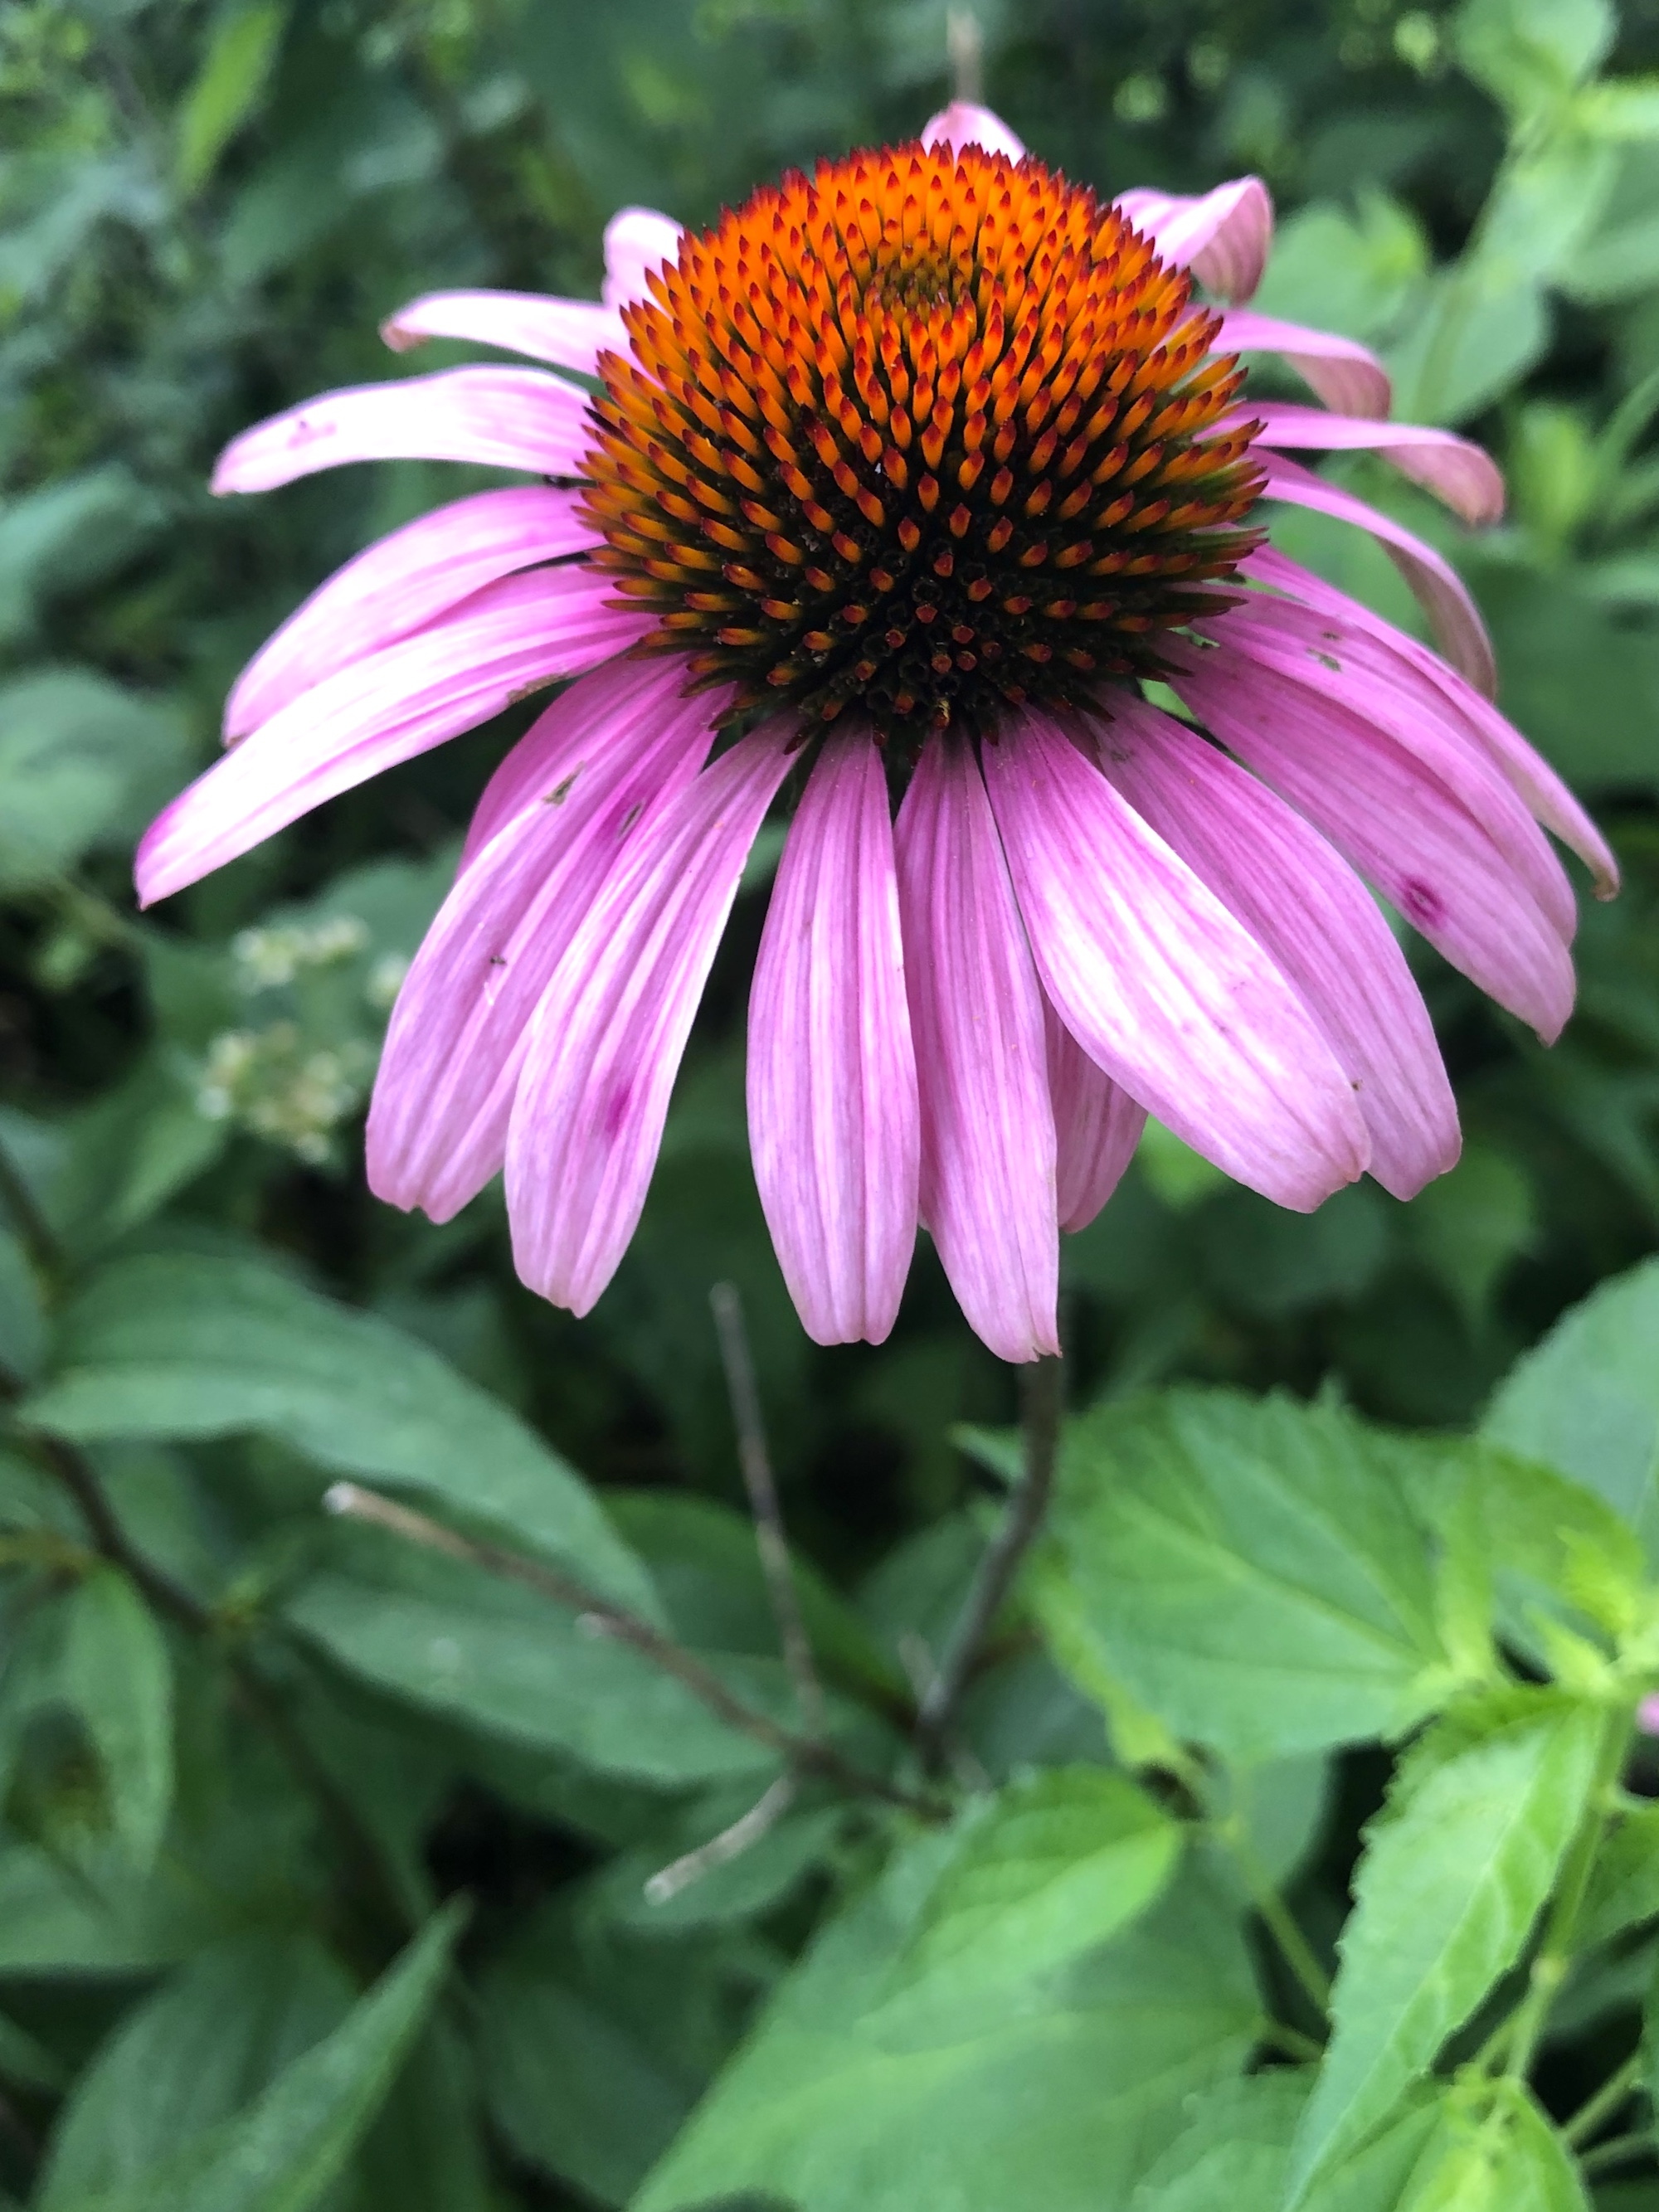 Purple coneflower in the woods in Nakoma Park in Madison, Wisconsin on July 28, 2020.